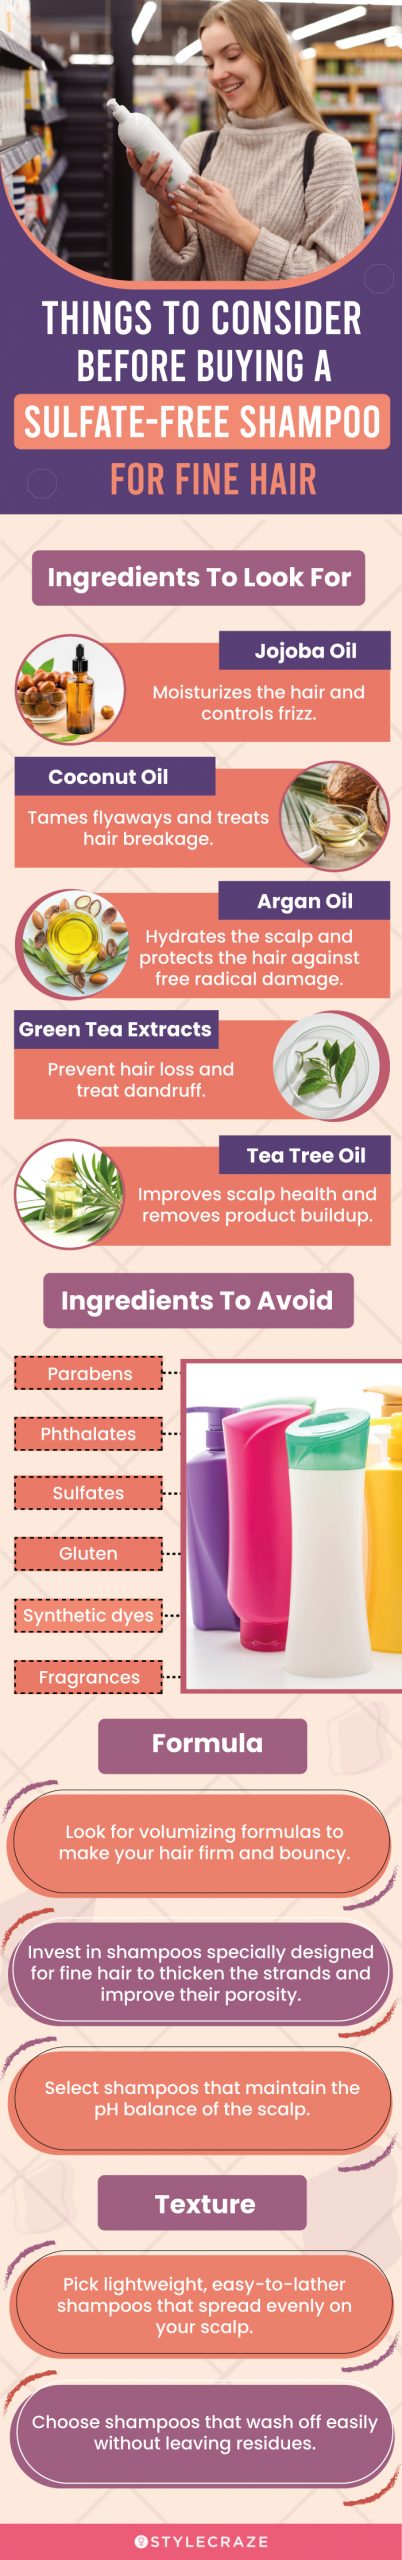 Things To Consider Before Buying A Sulfate-Free Shampoo For Fine Hair (infographic)